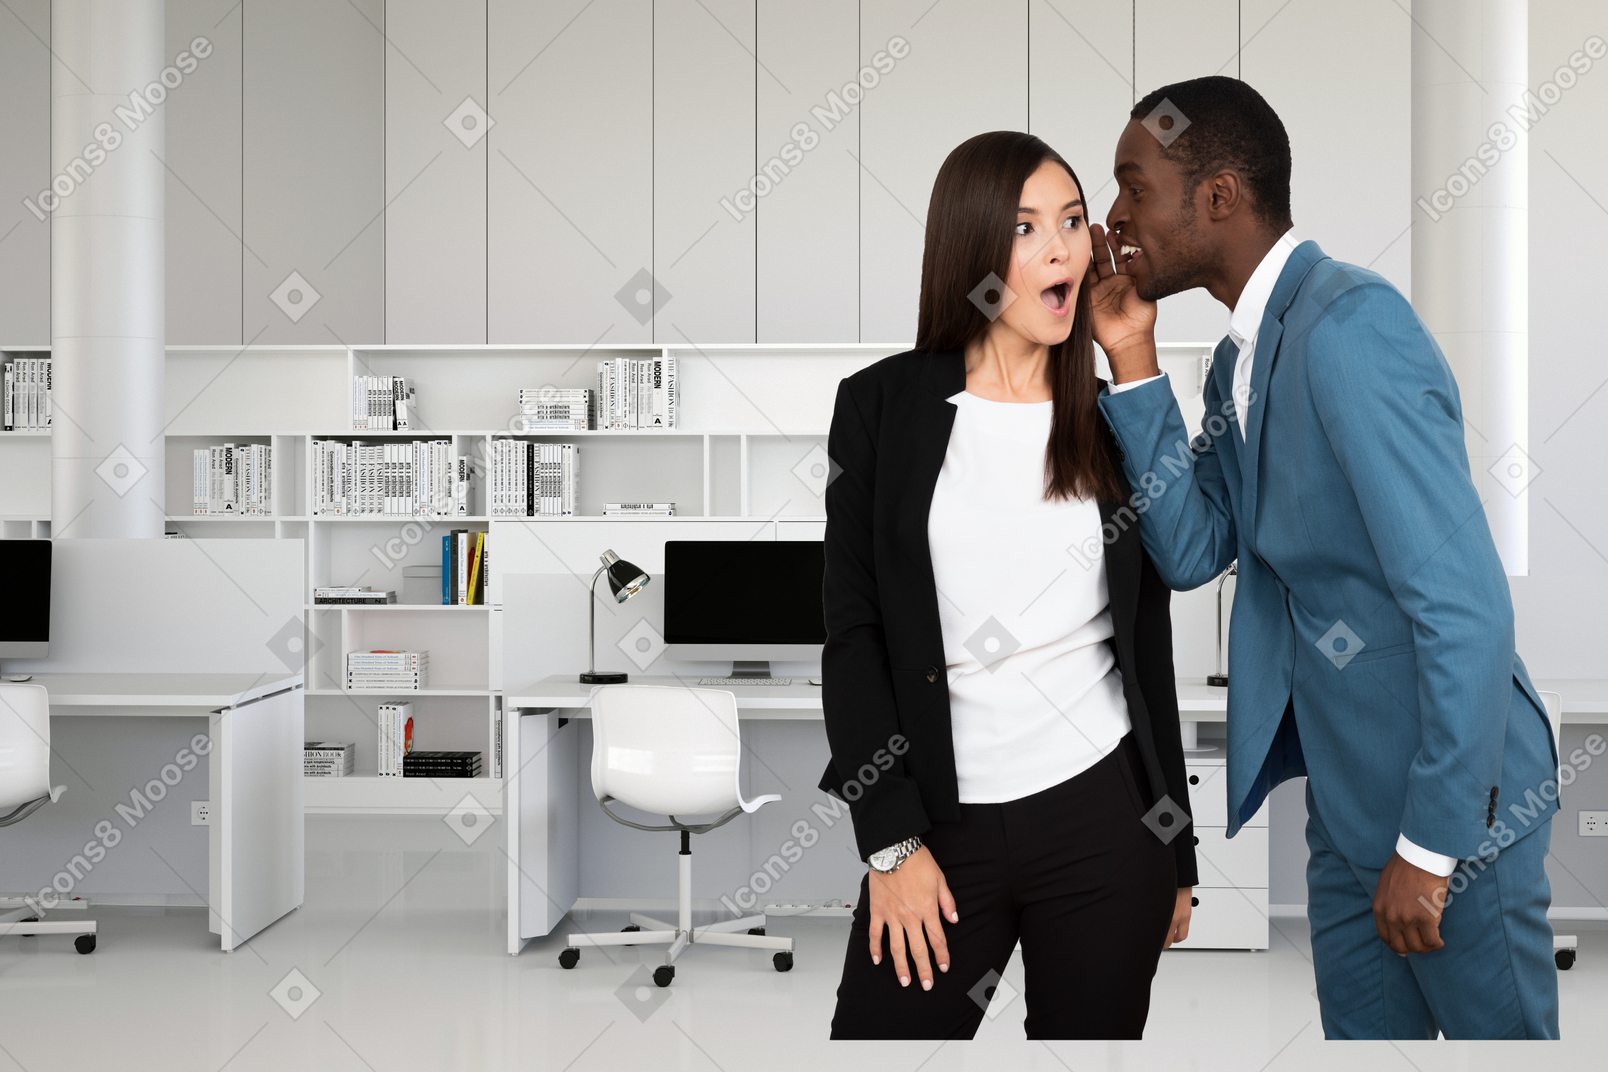 A man and woman standing in an office